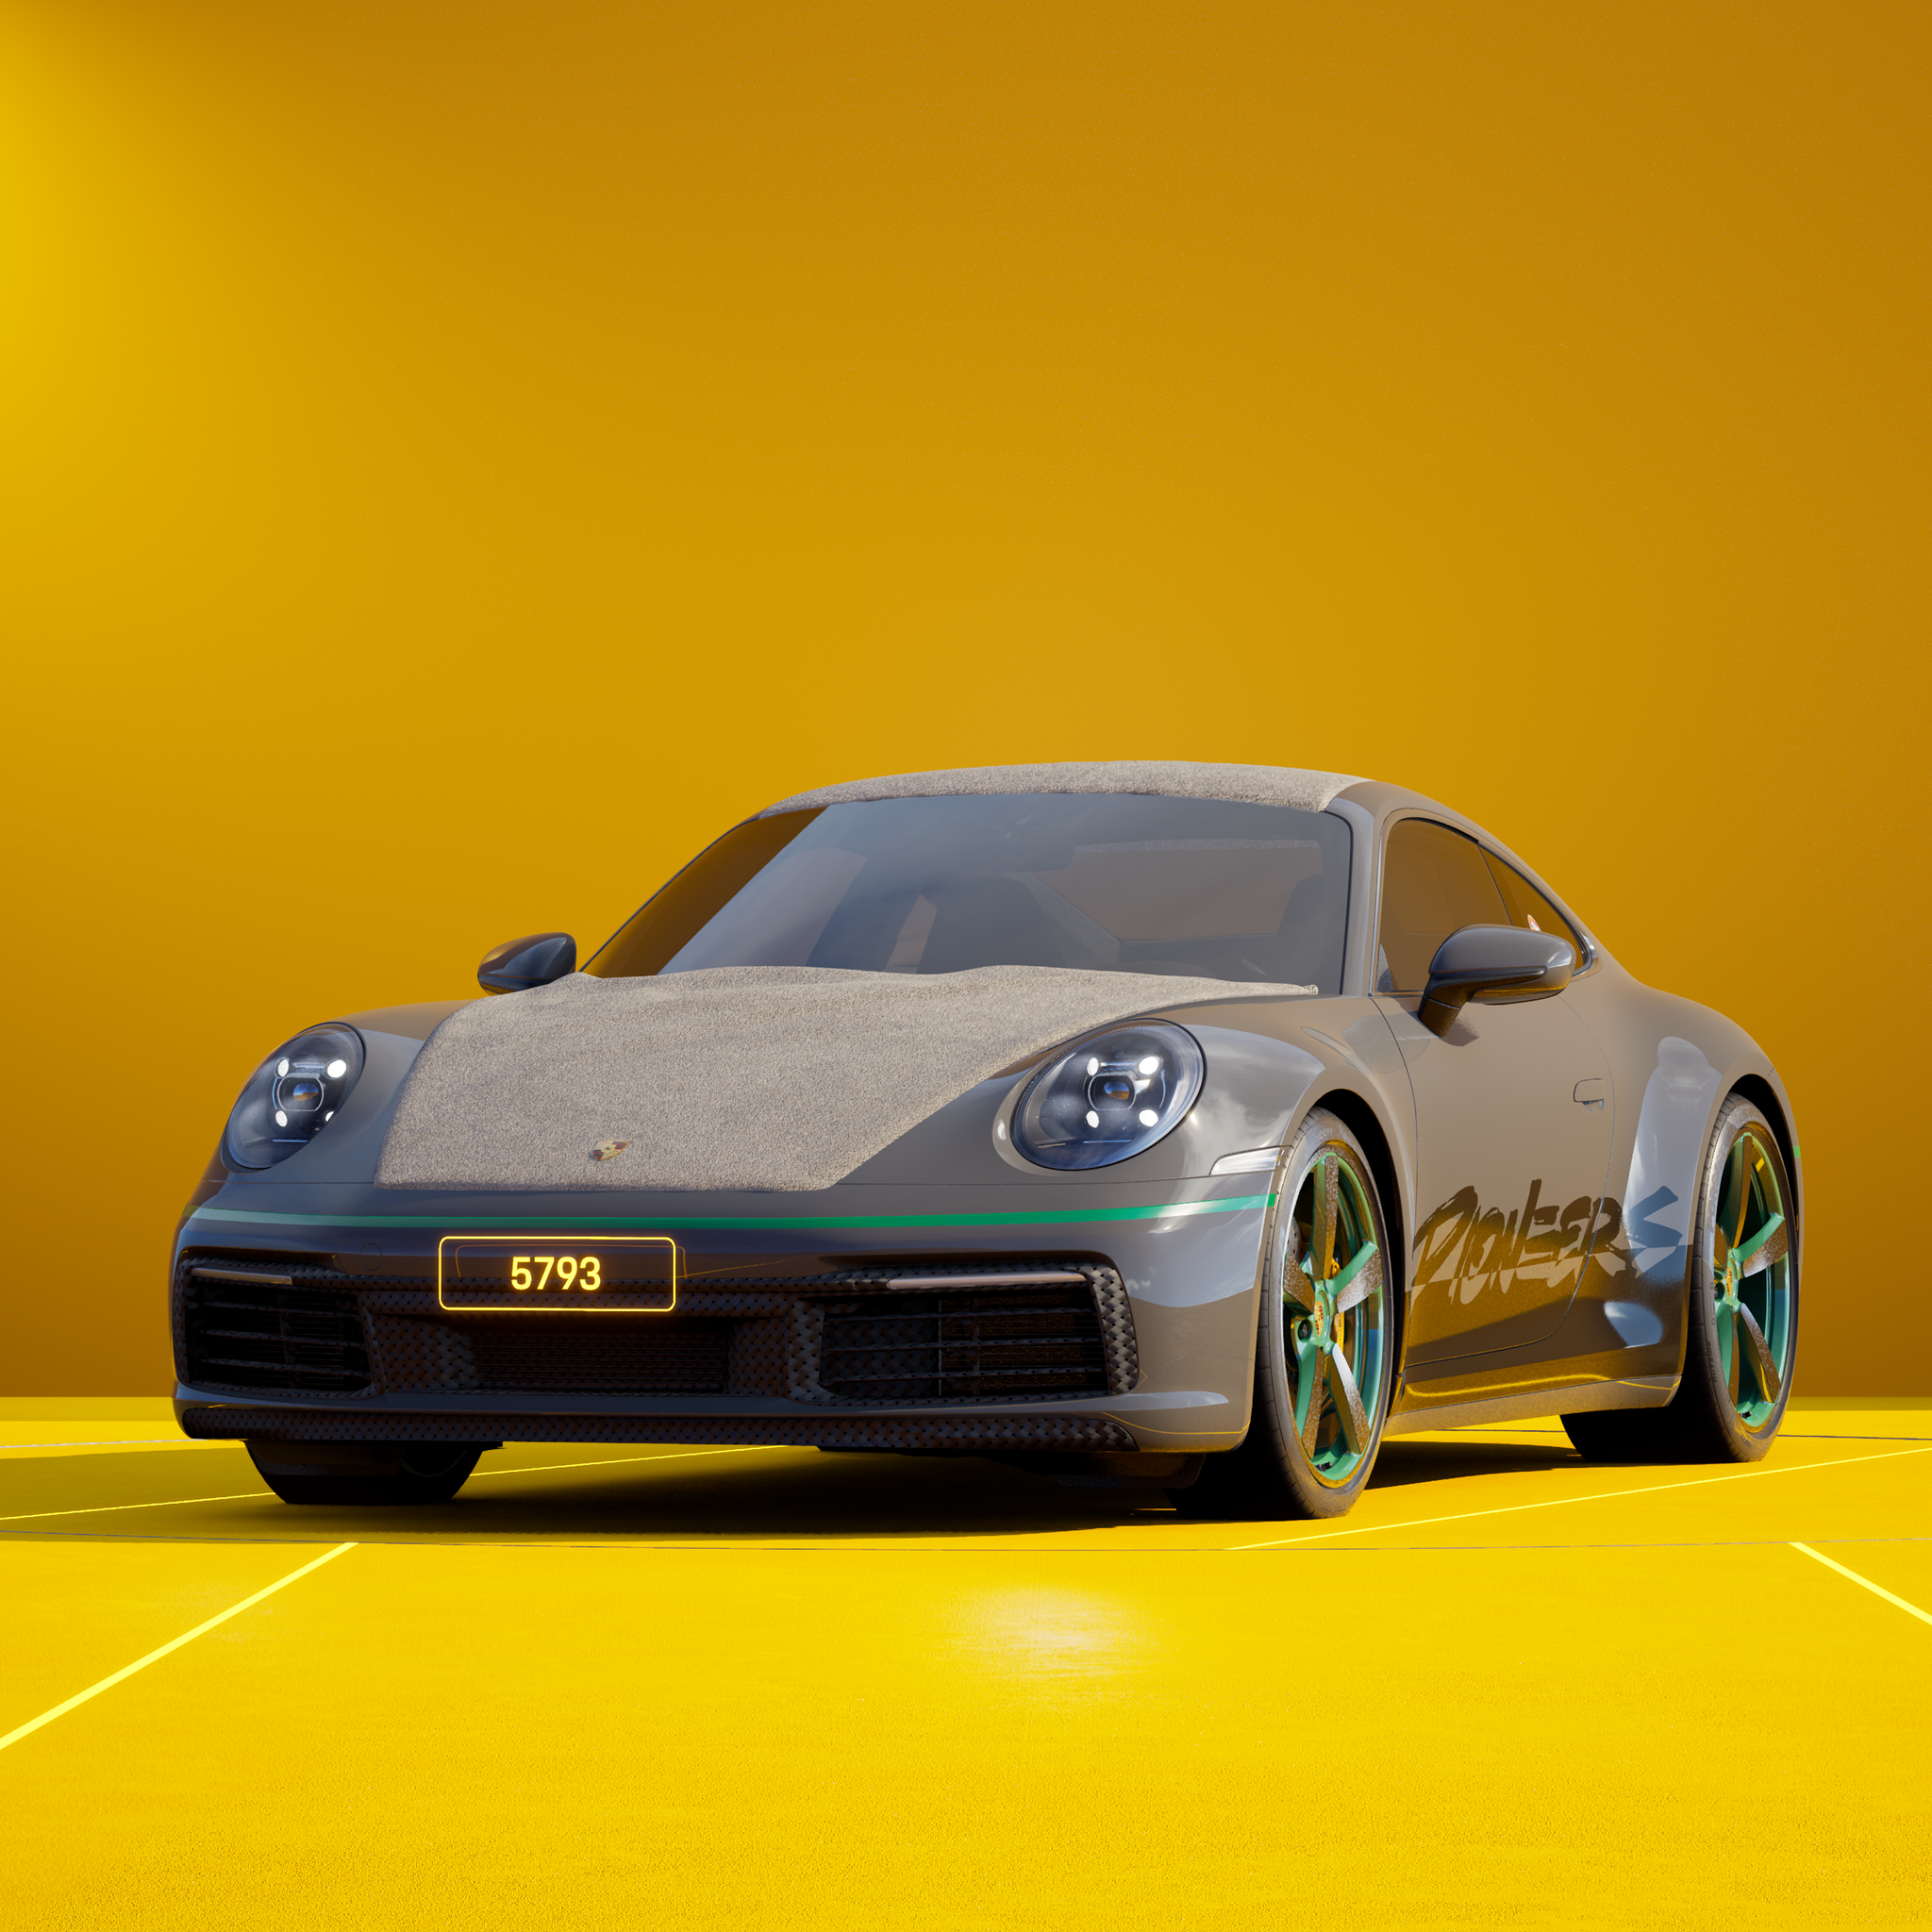 The PORSCHΞ 911 5793 image in phase